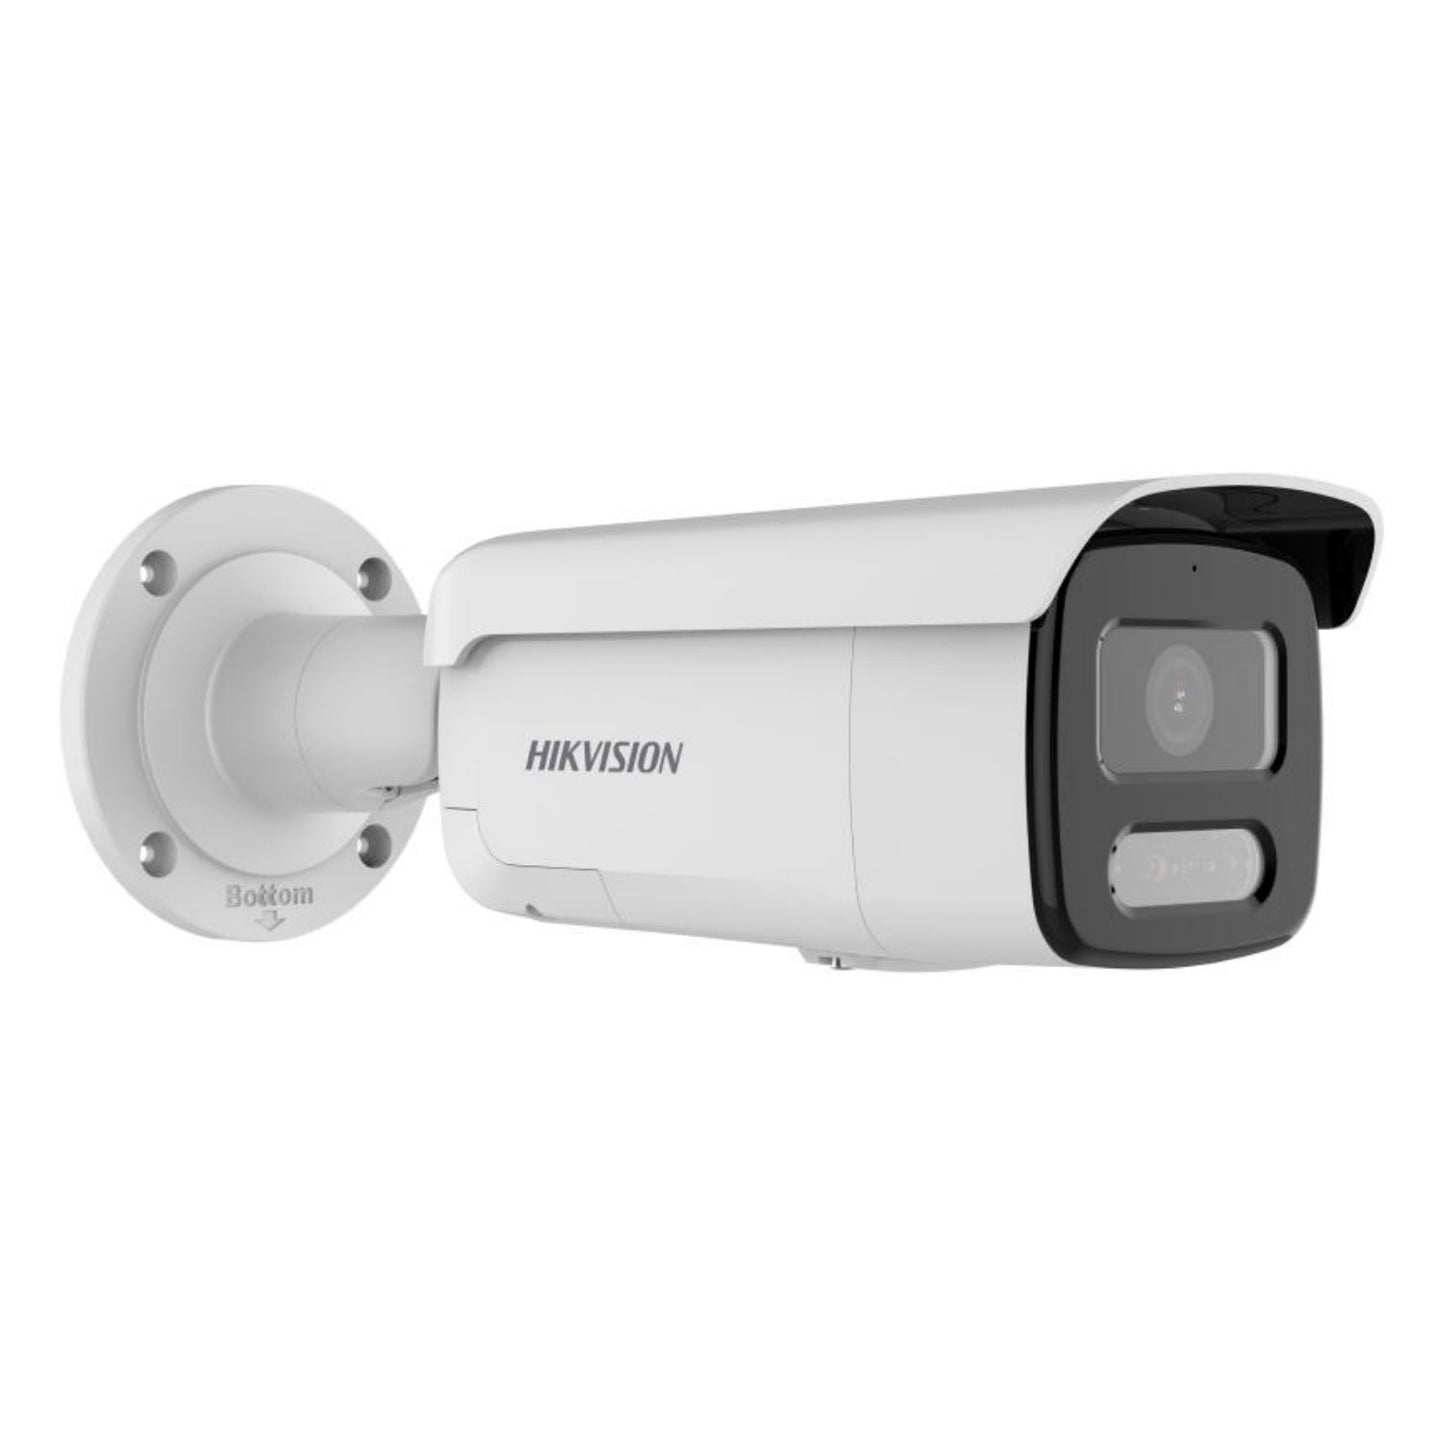 DS-2CD2T47G2-LSU/SL 2.8mm - 4 MP ColorVu Strobe Light and Audible Warning Fixed Bullet Network Camera